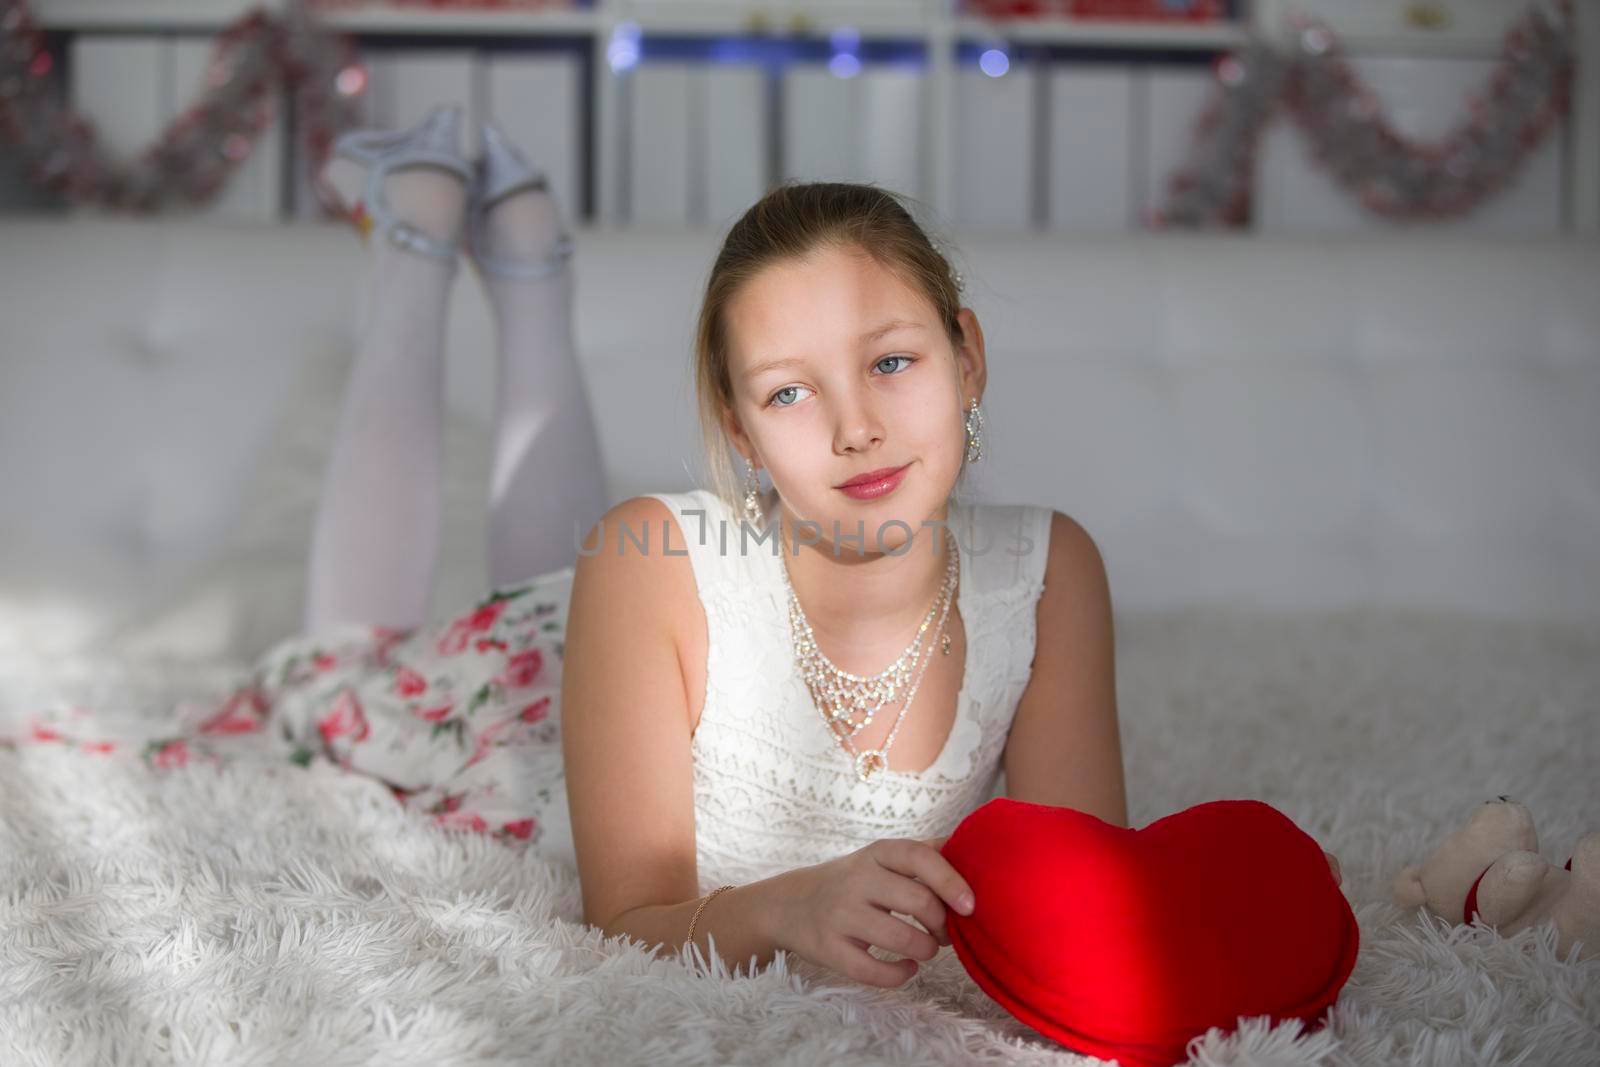 Very beautiful teen girl lying on a bed with a red heart pillow.Cute tender girl teenager dreams. Young lady